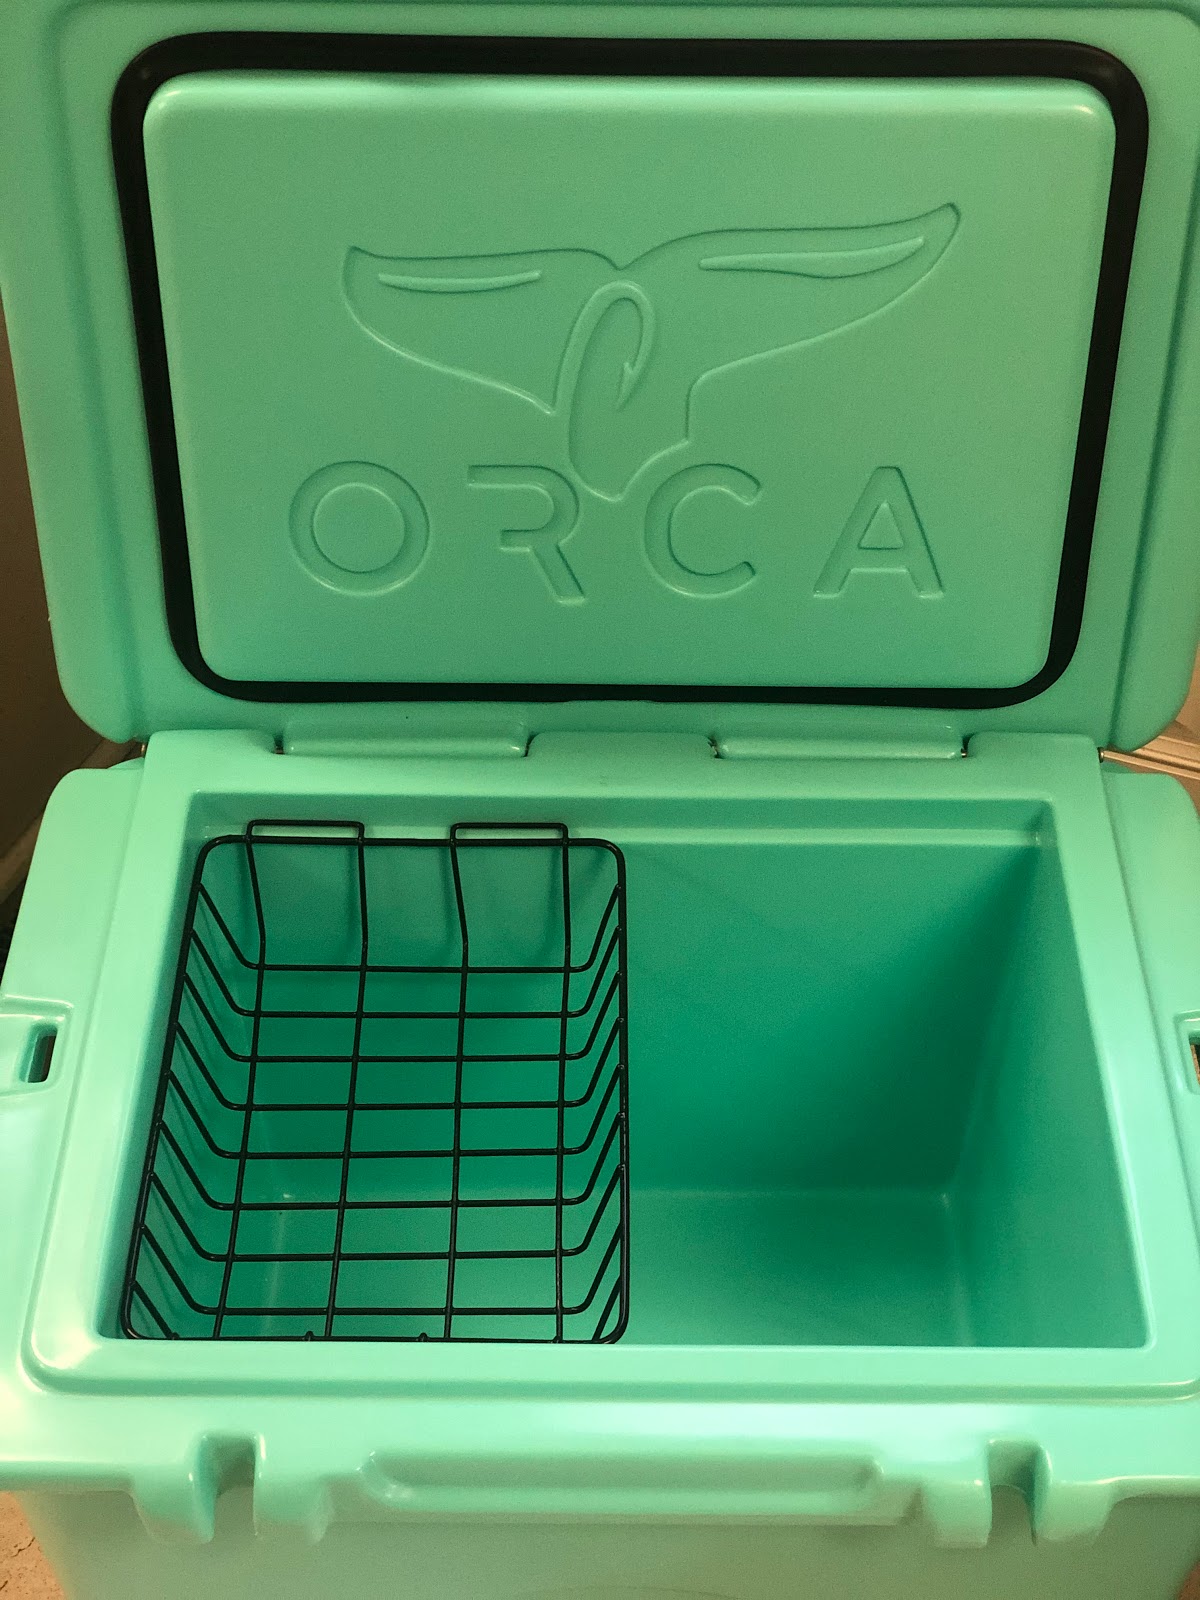 Orca Cooler Review - Grill Girl